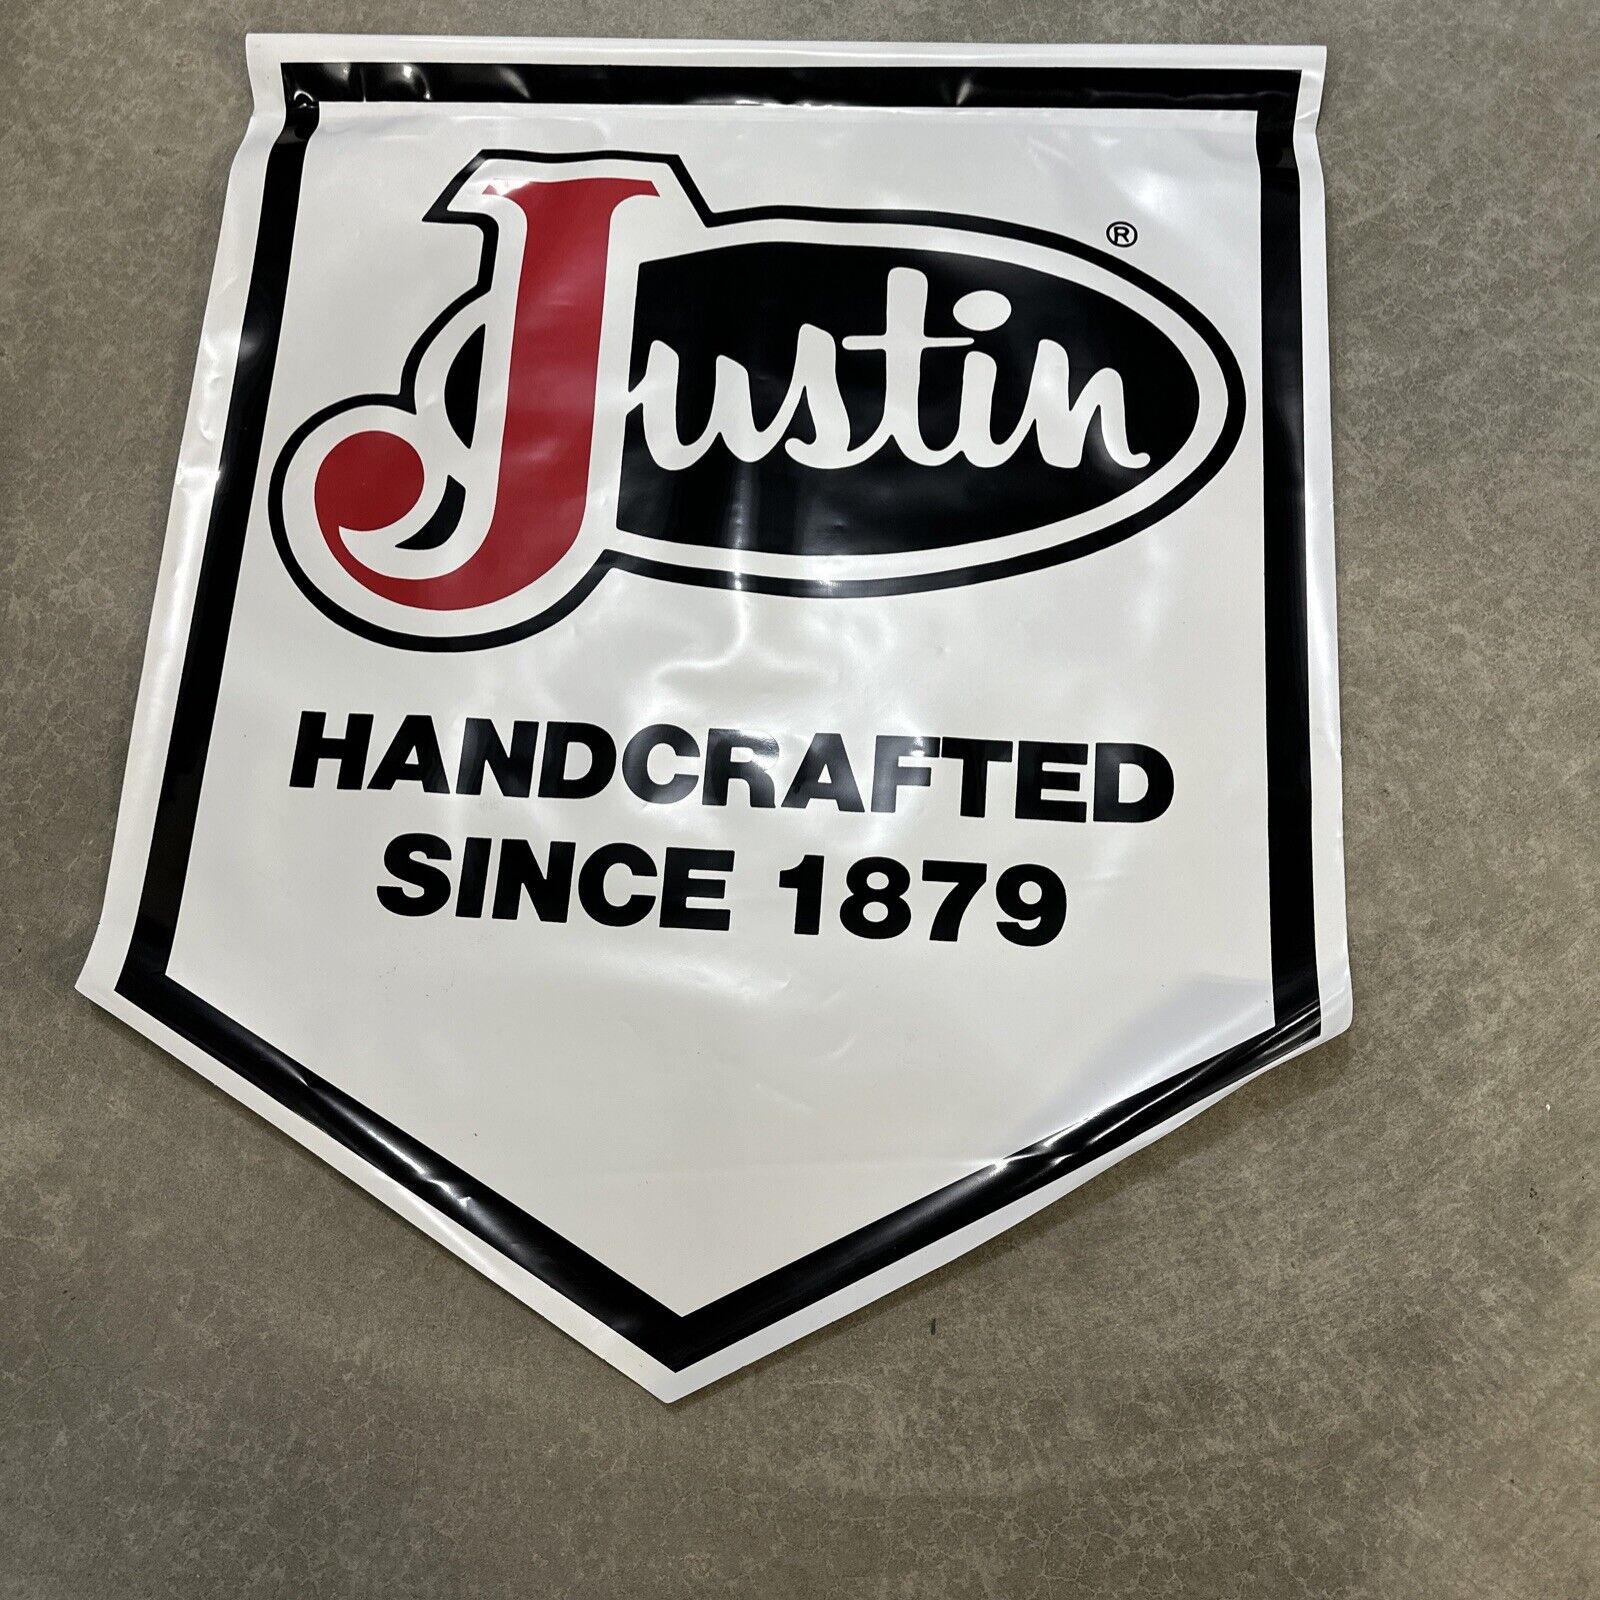 Vintage Justin Boots Store Display Banner Sign 30”x36” Handcrafted Since 1879